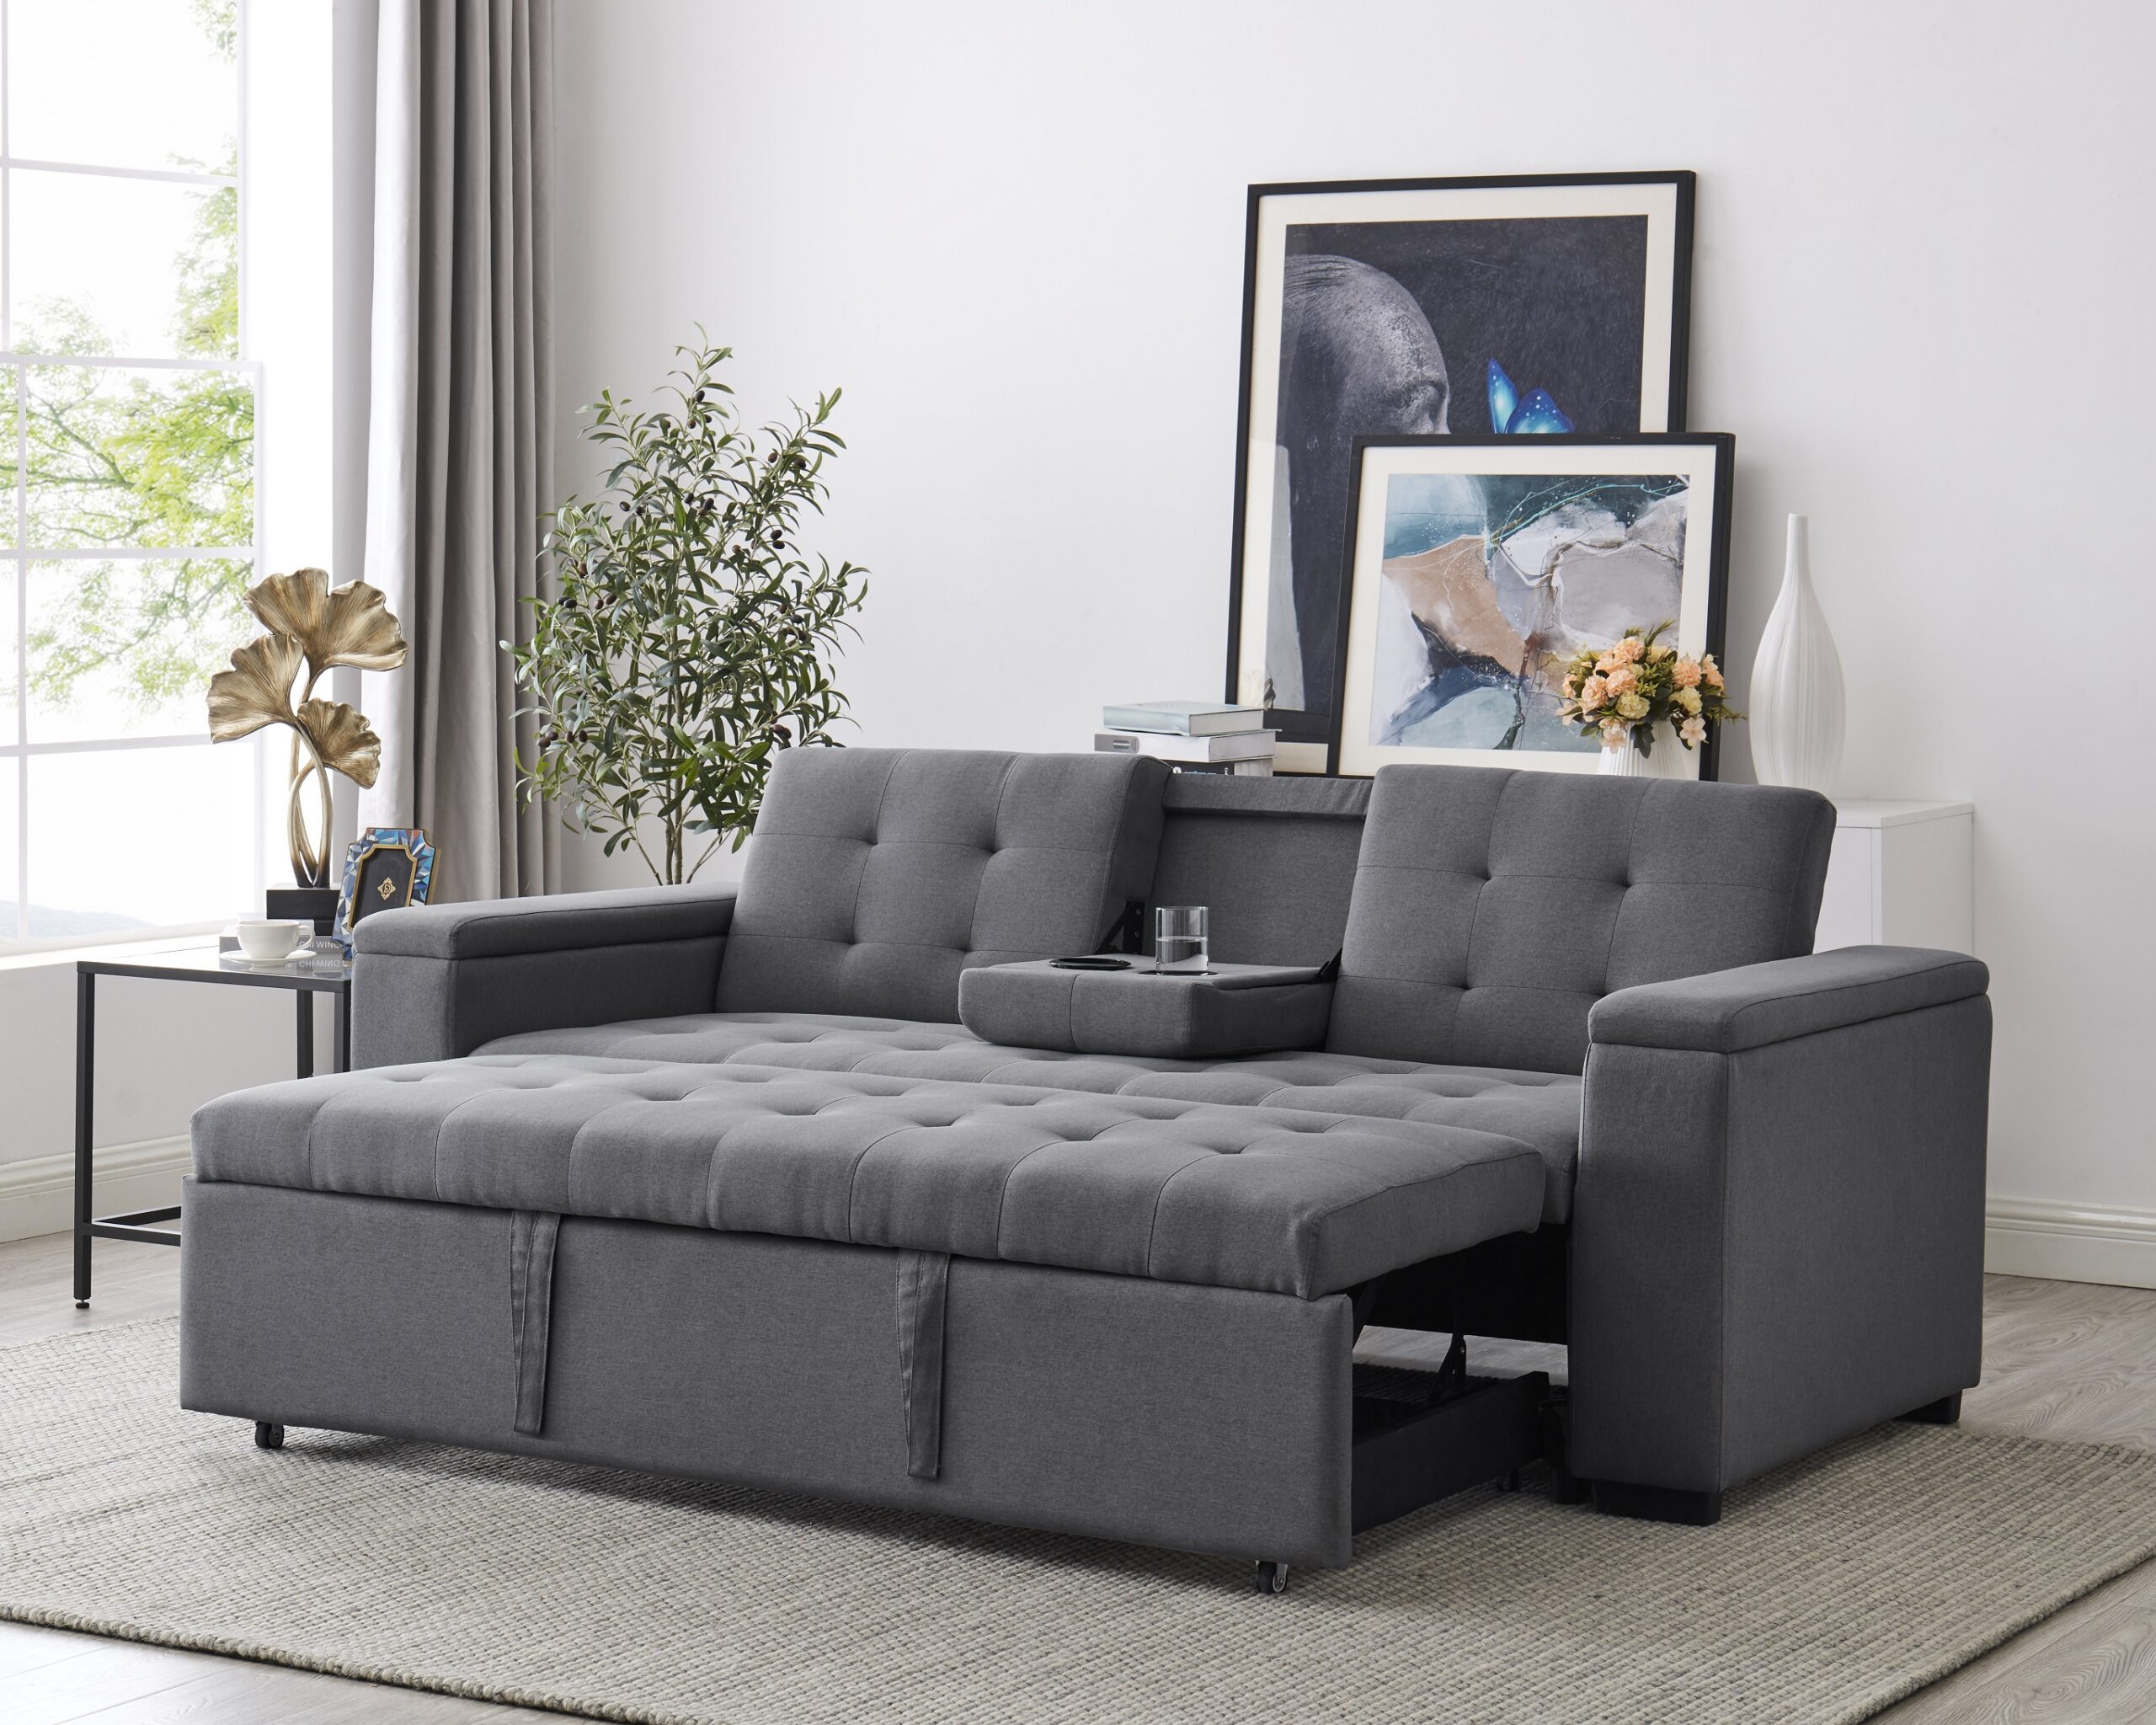 Olympia Sofa Bed Clearance Was 799